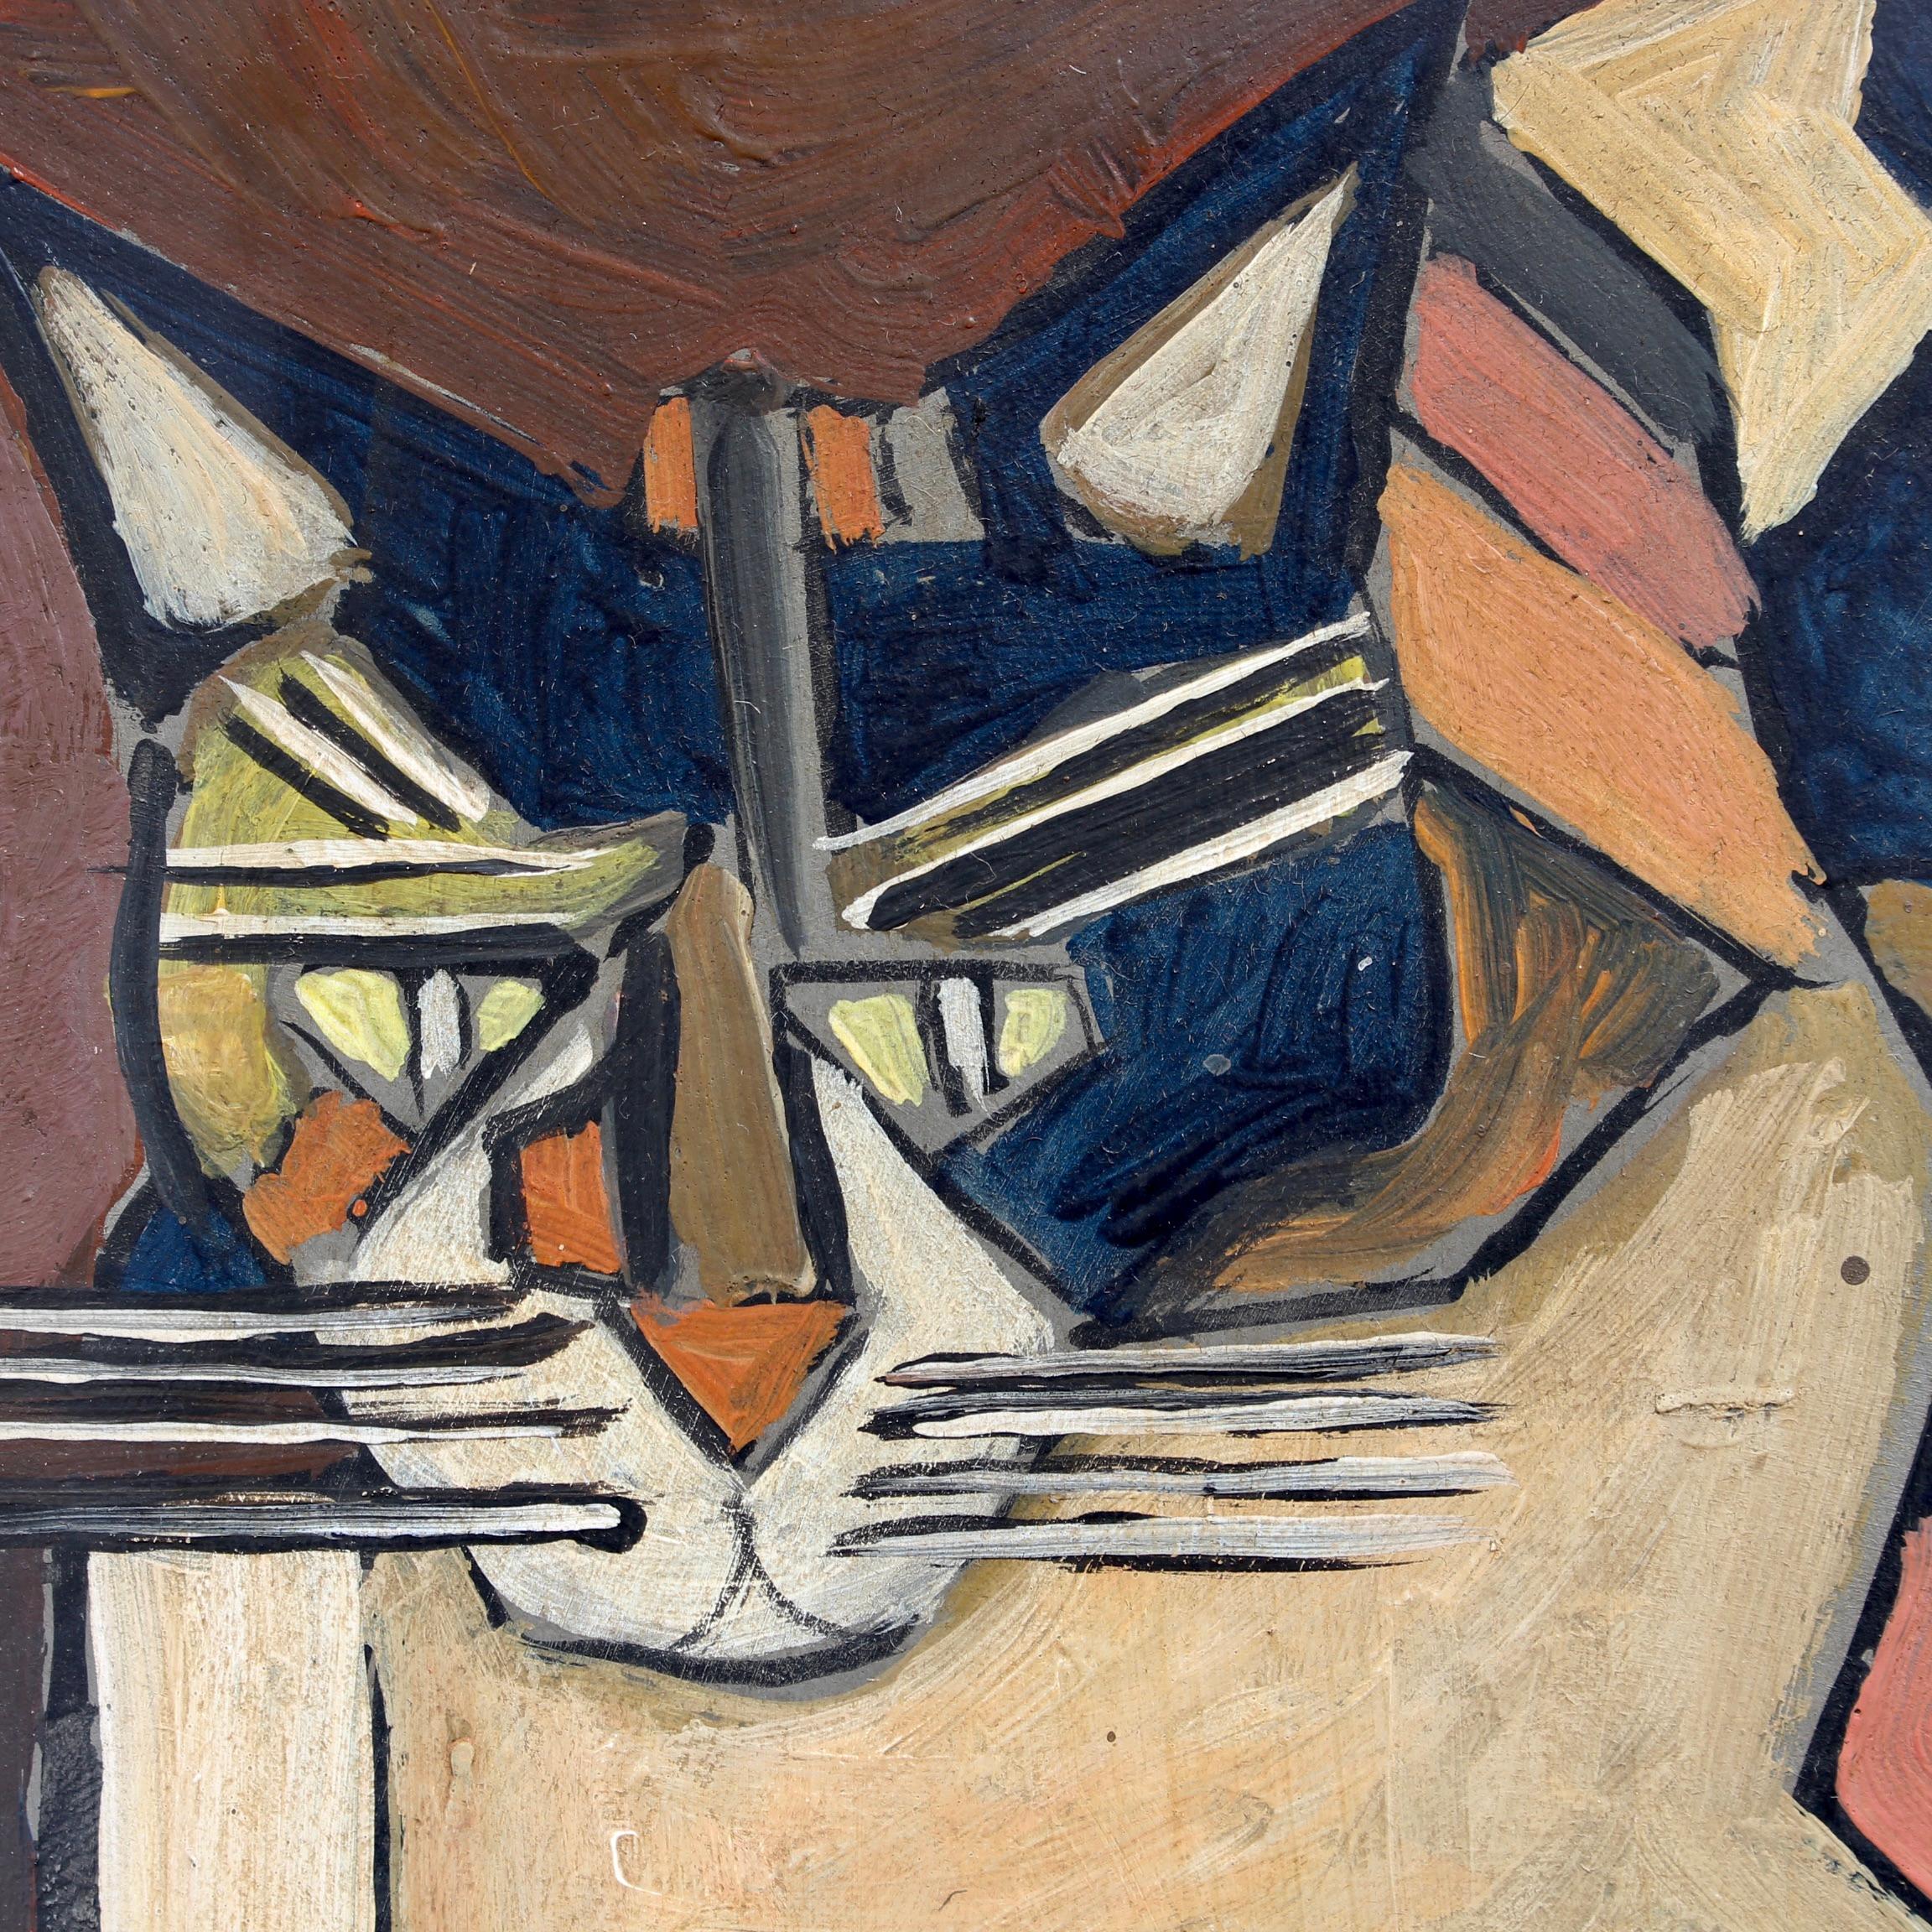 'Portrait of a Feline' by unknown artist, Ross, oil on board (circa 1960s). Without a doubt inspired by the works of the Cubists, particularly Picasso, this is a warm hearted portrait of a friendly feline in repose. Picasso himself painted stylised